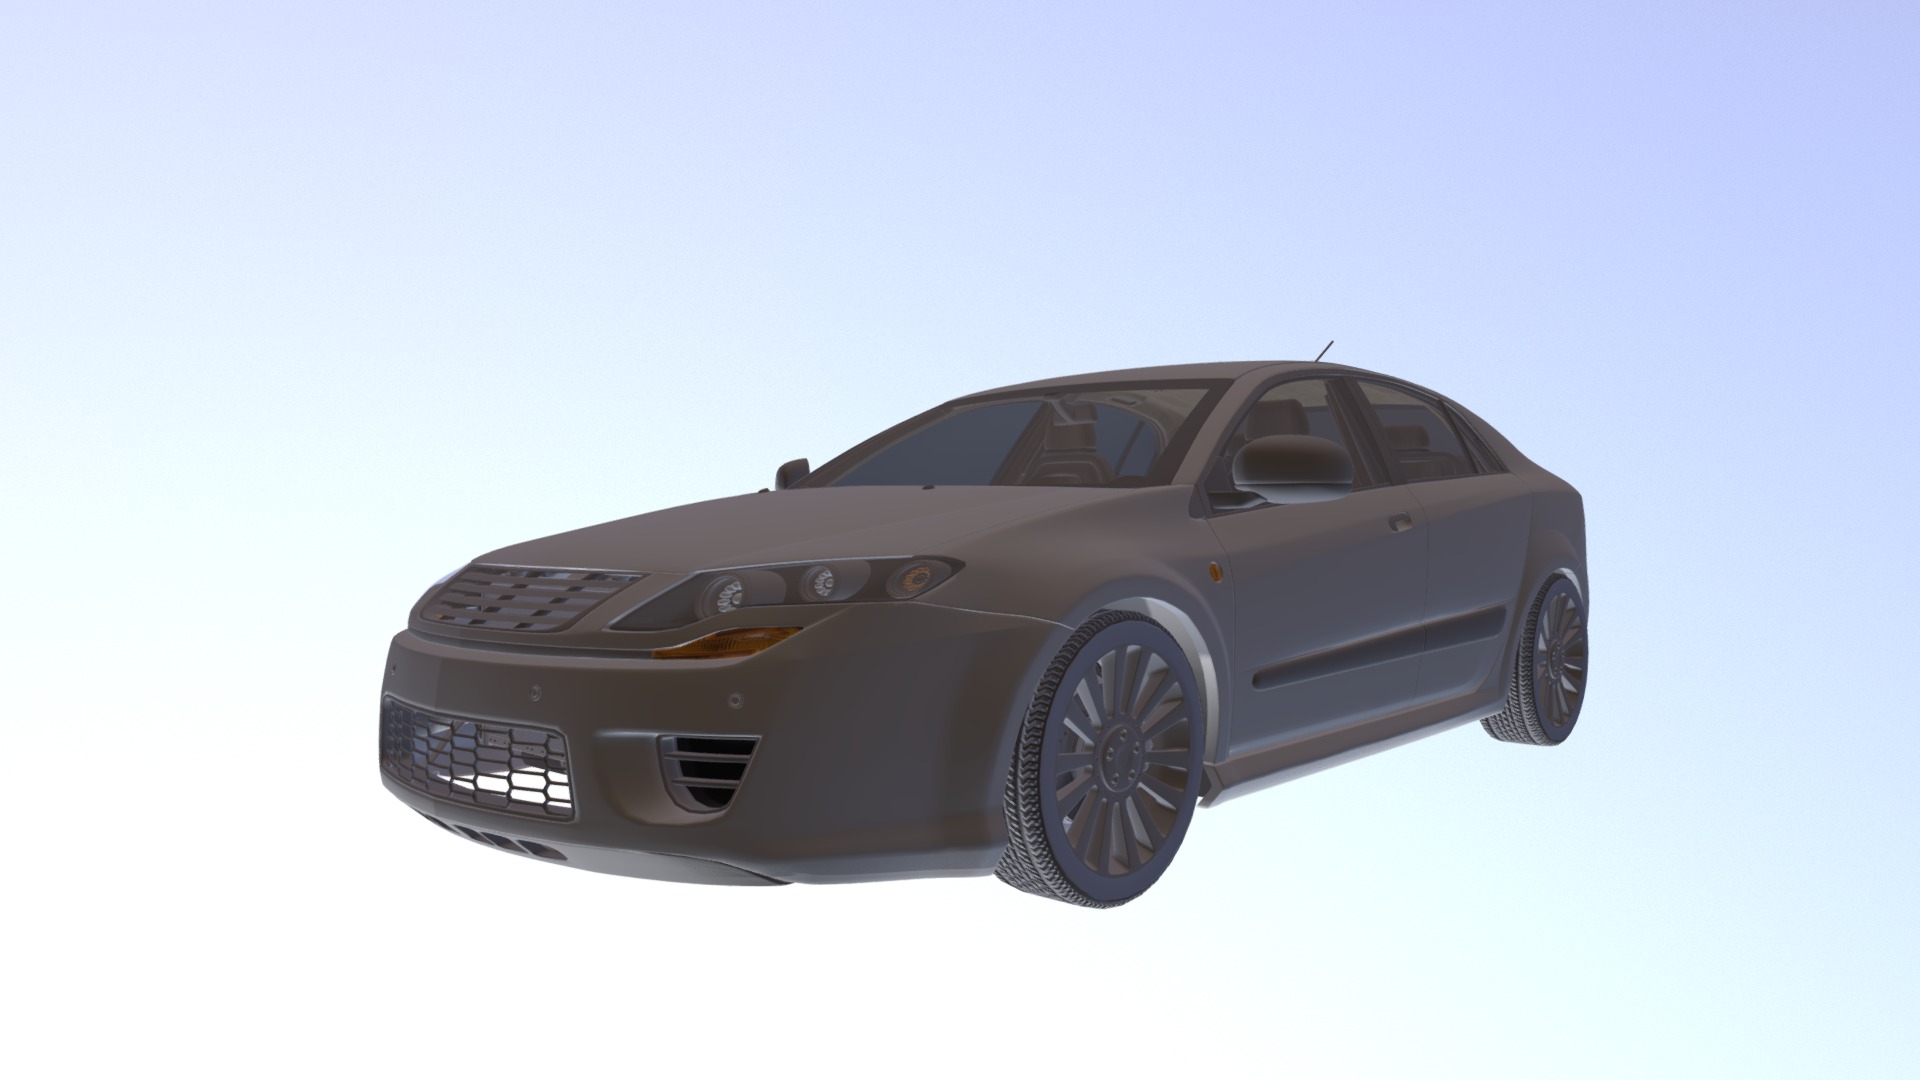 3D model Dosch – Car Details V2 – OBJ - This is a 3D model of the Dosch - Car Details V2 - OBJ. The 3D model is about a car with a spoiler.